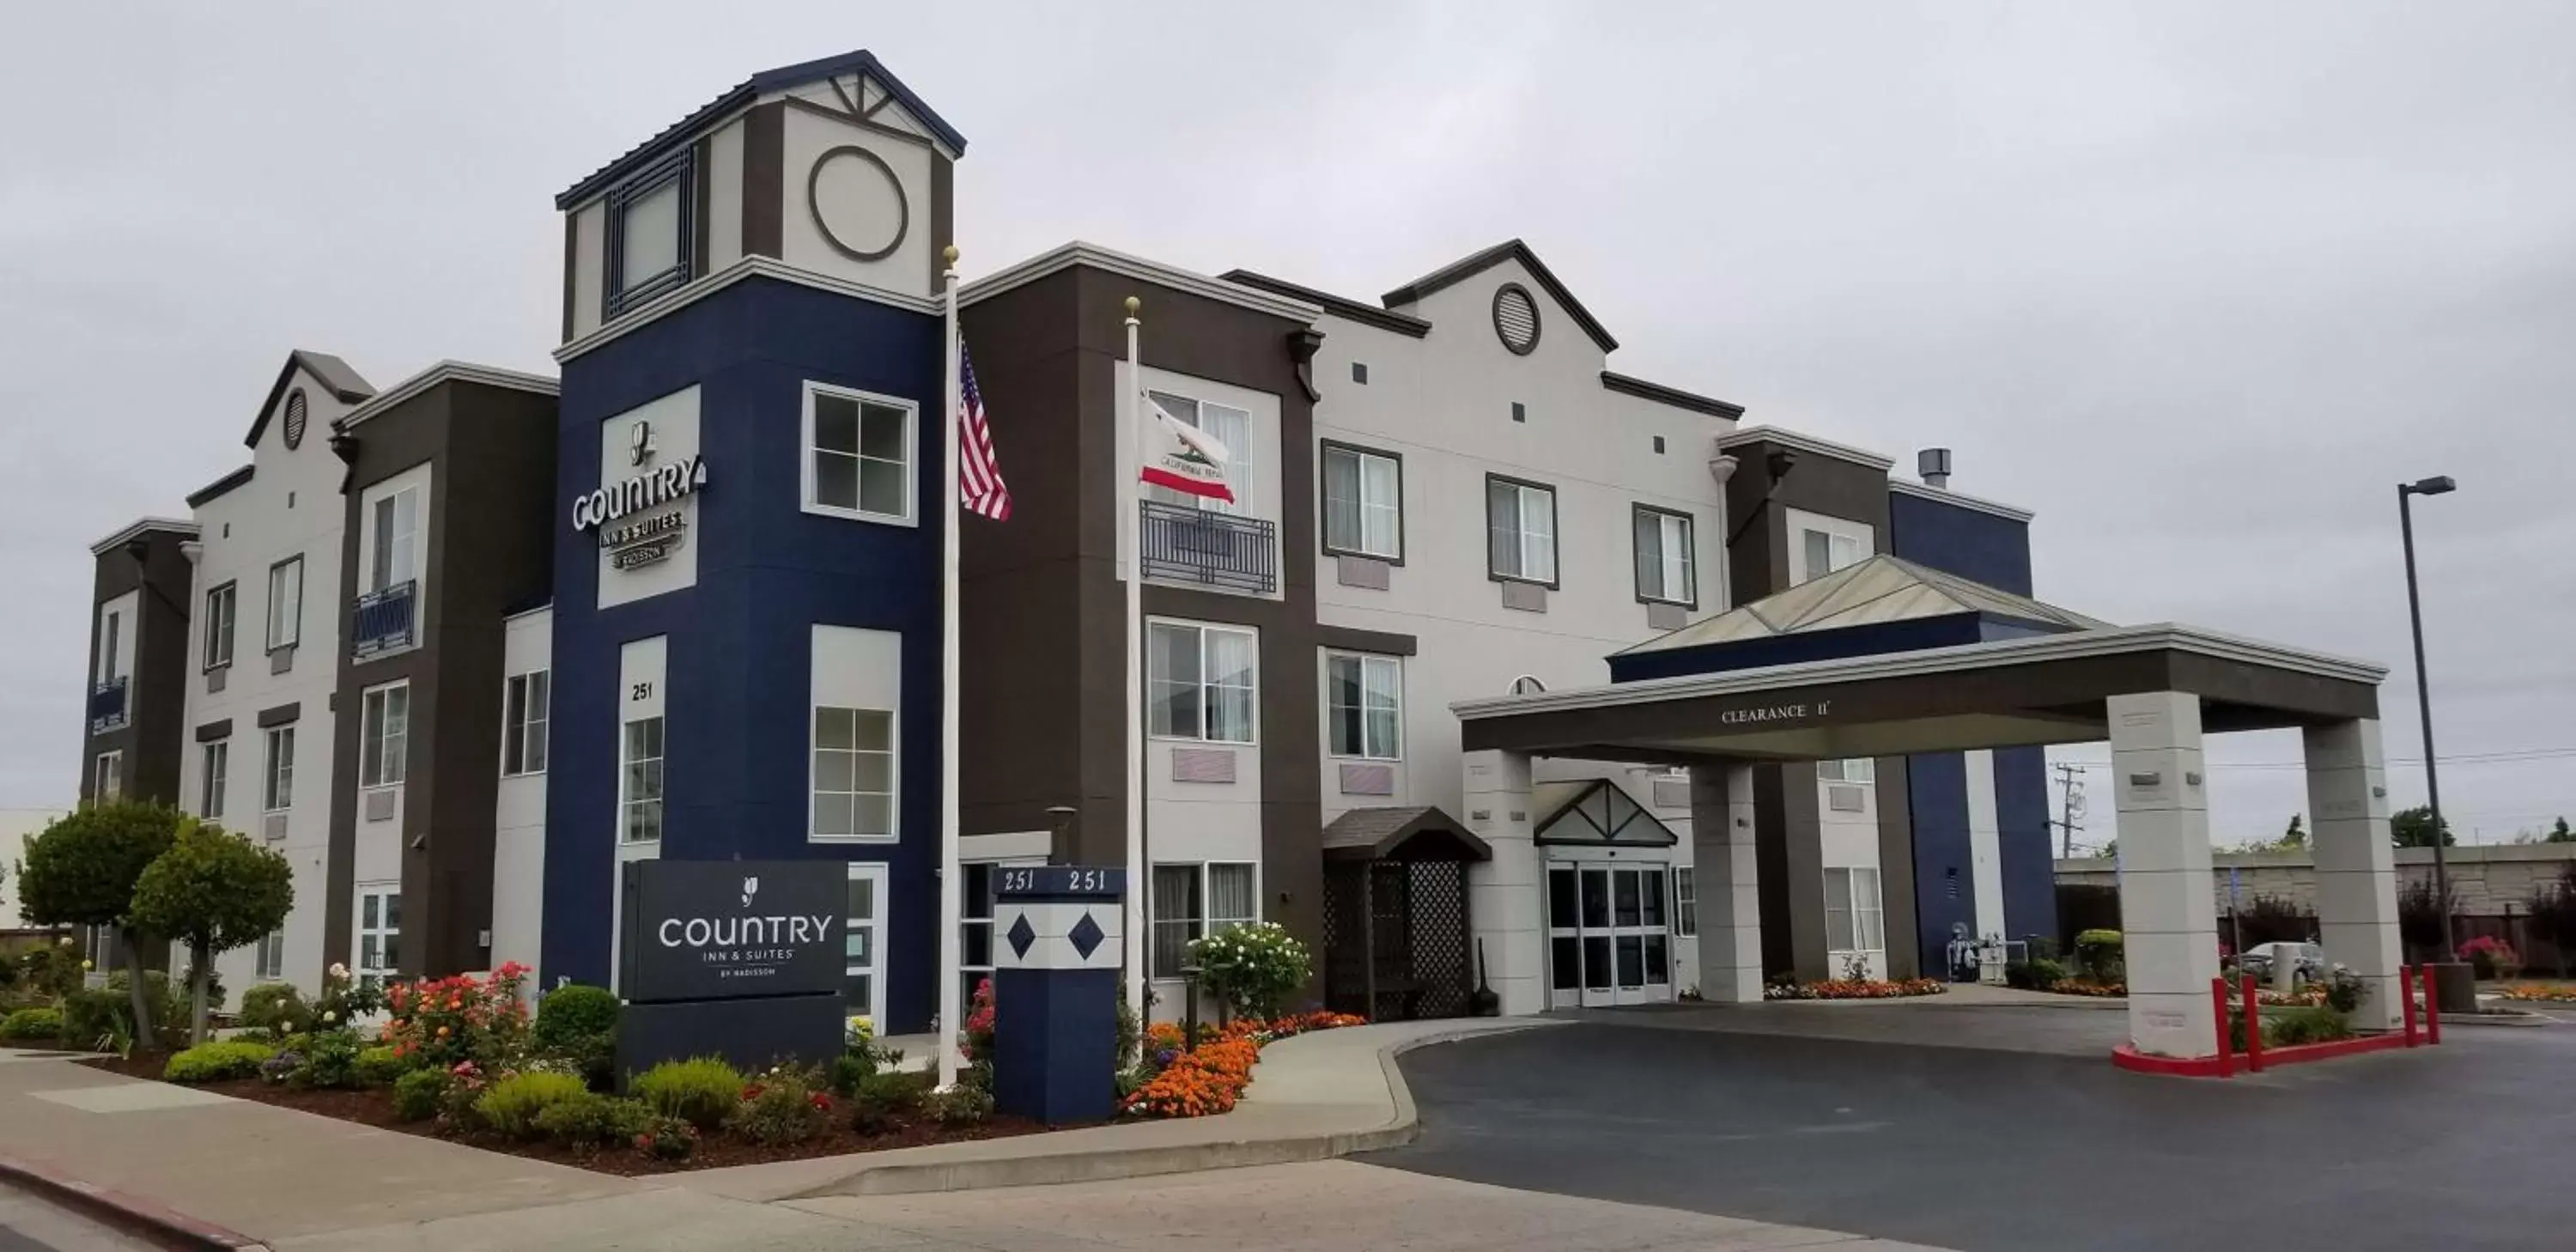 Property building in Country Inn & Suites by Radisson, San Carlos, CA